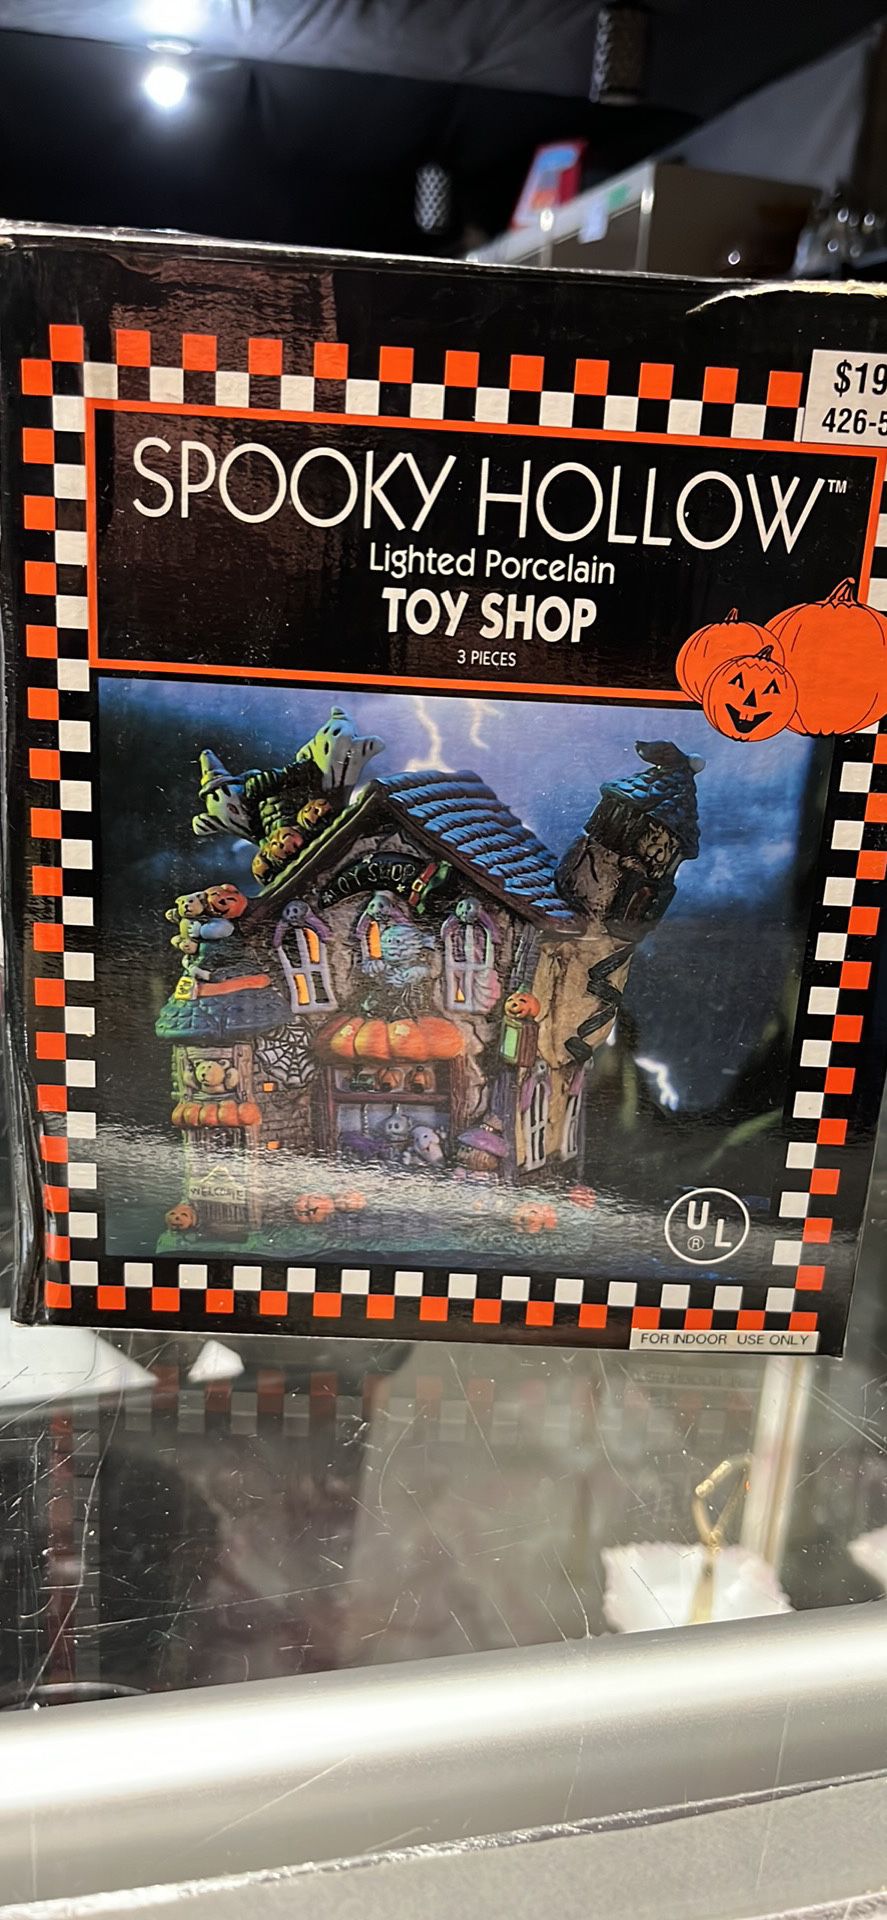 1998 Spooky Hollow Lighted Porcelain Toy Shop 